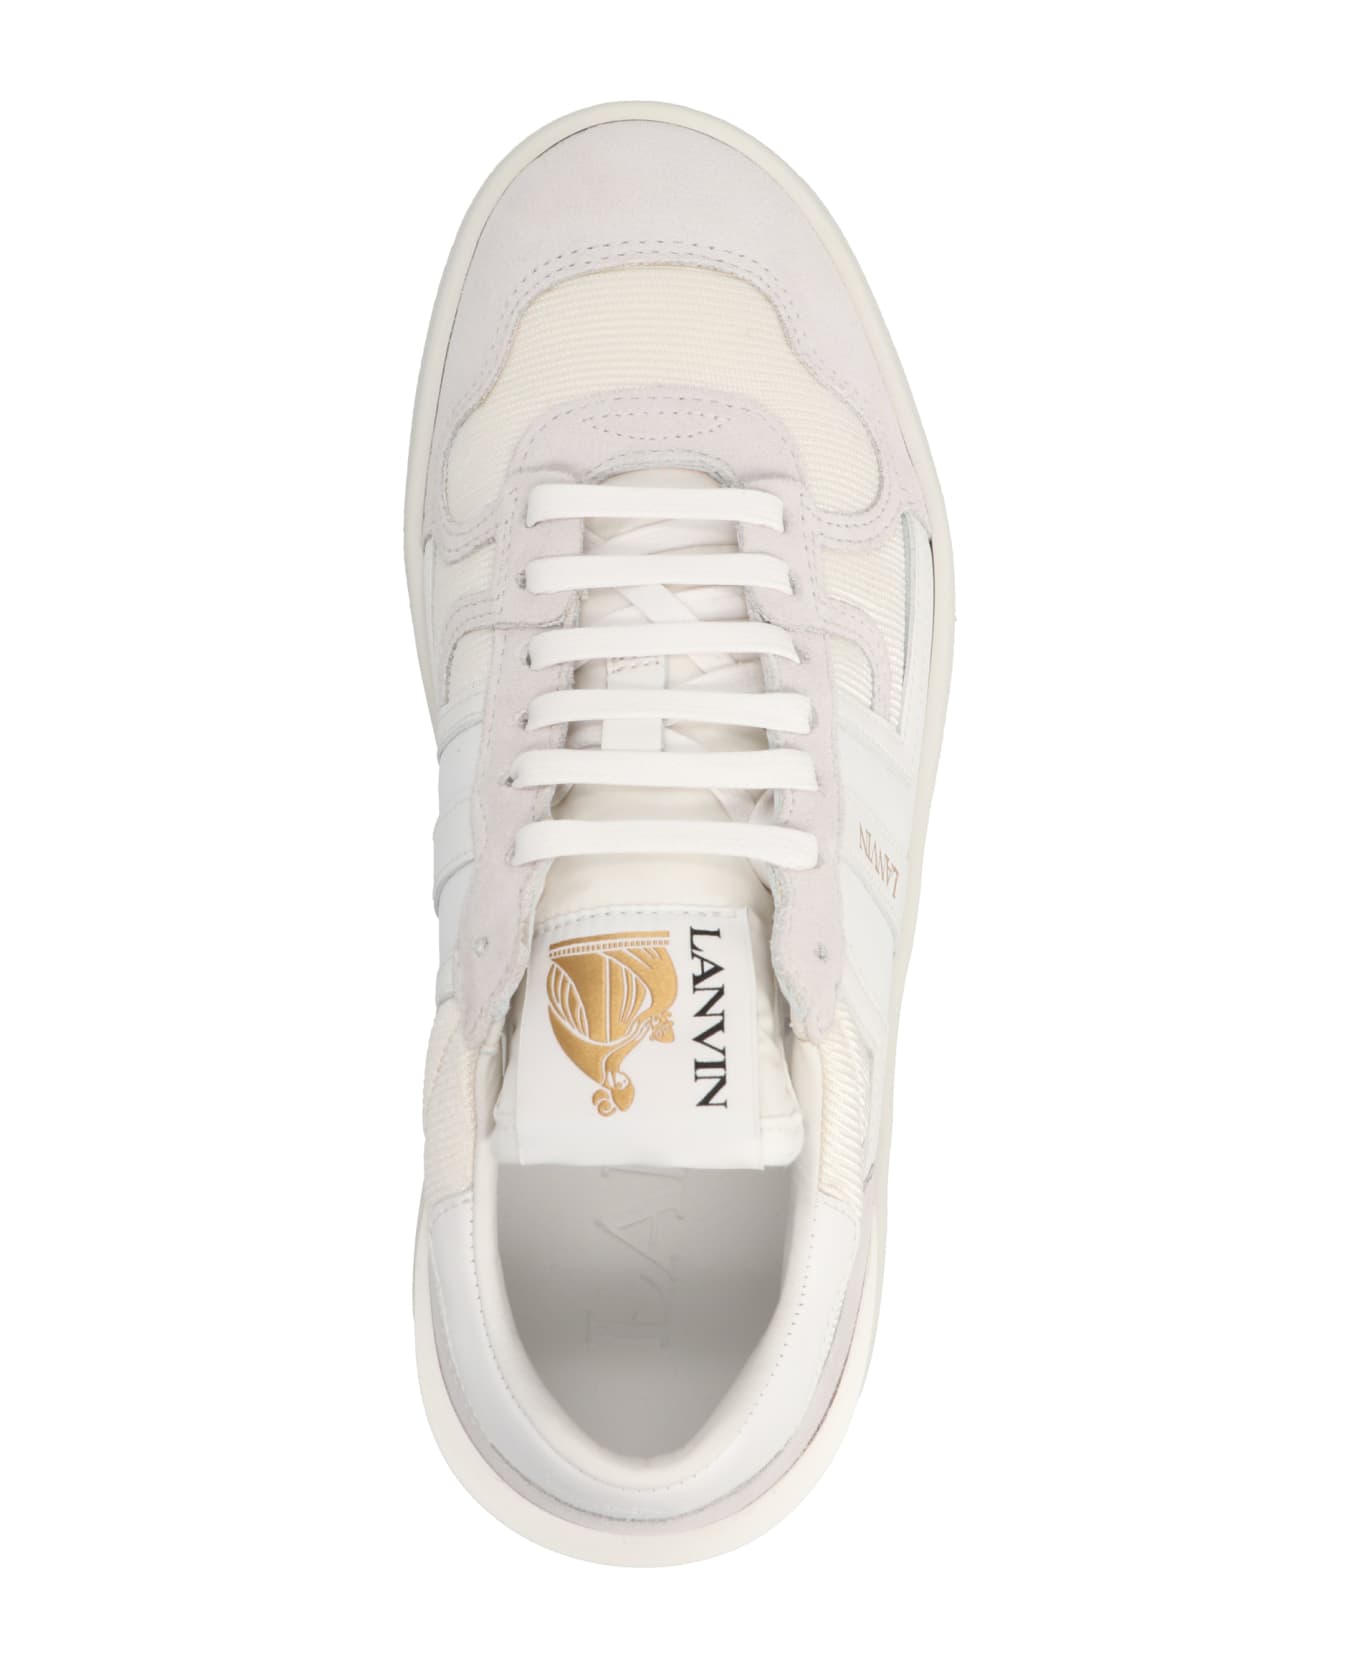 Lanvin 'clay' Sneakers - White